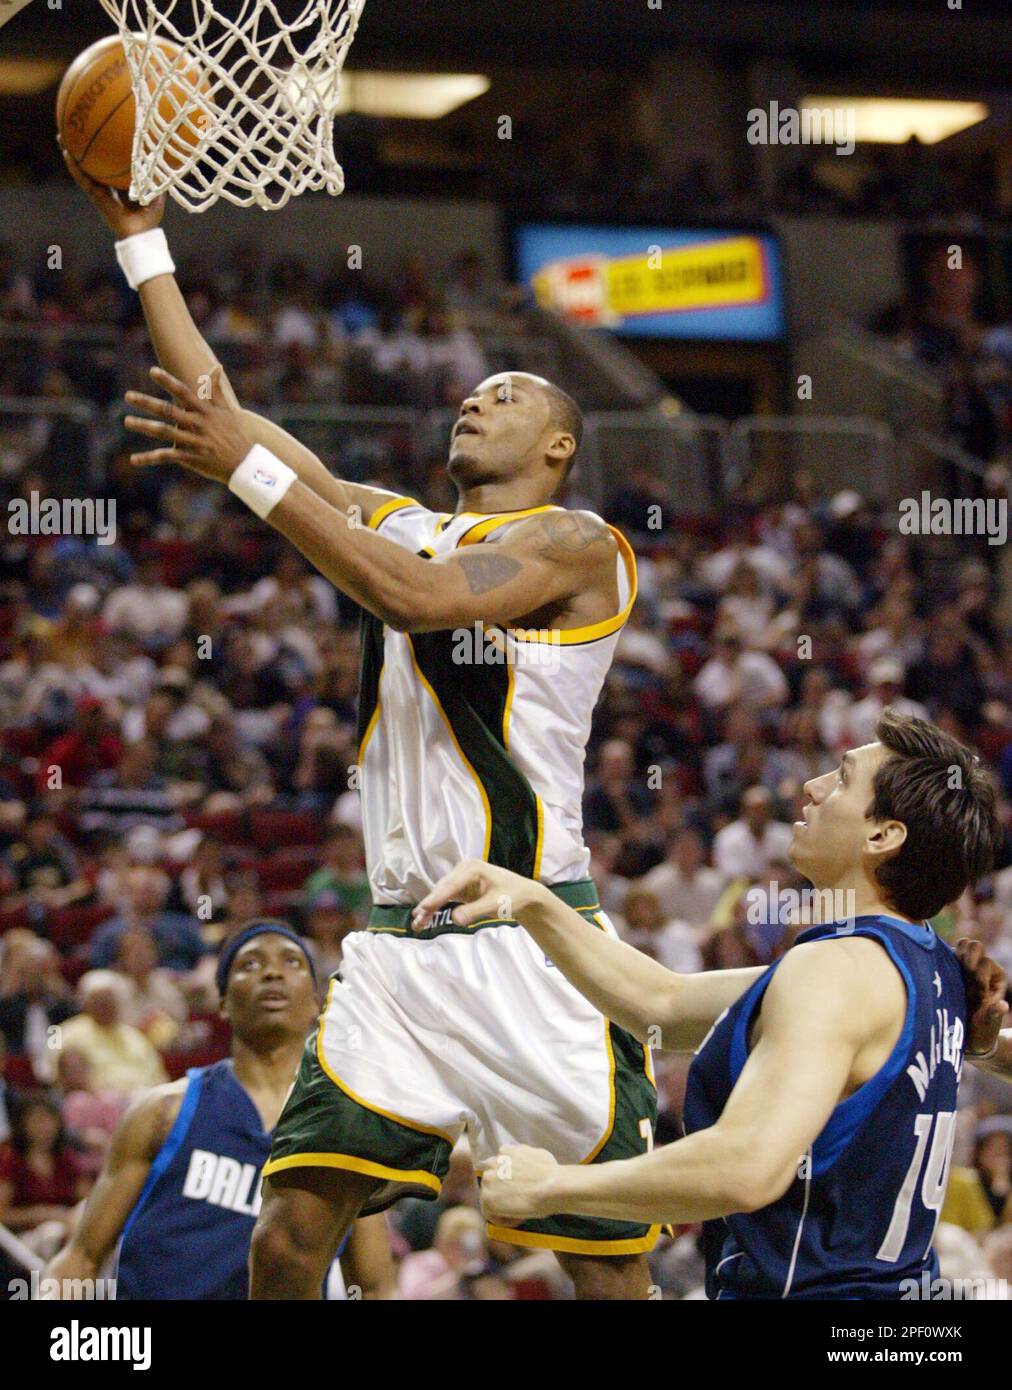 Seattle SuperSonics' Rashard Lewis holds up his shoes before throwing them  into the cheering crowd following the Sonics' 97-72 win over the New  Orleans Hornets on Friday, April 15, 2005, in Seattle.